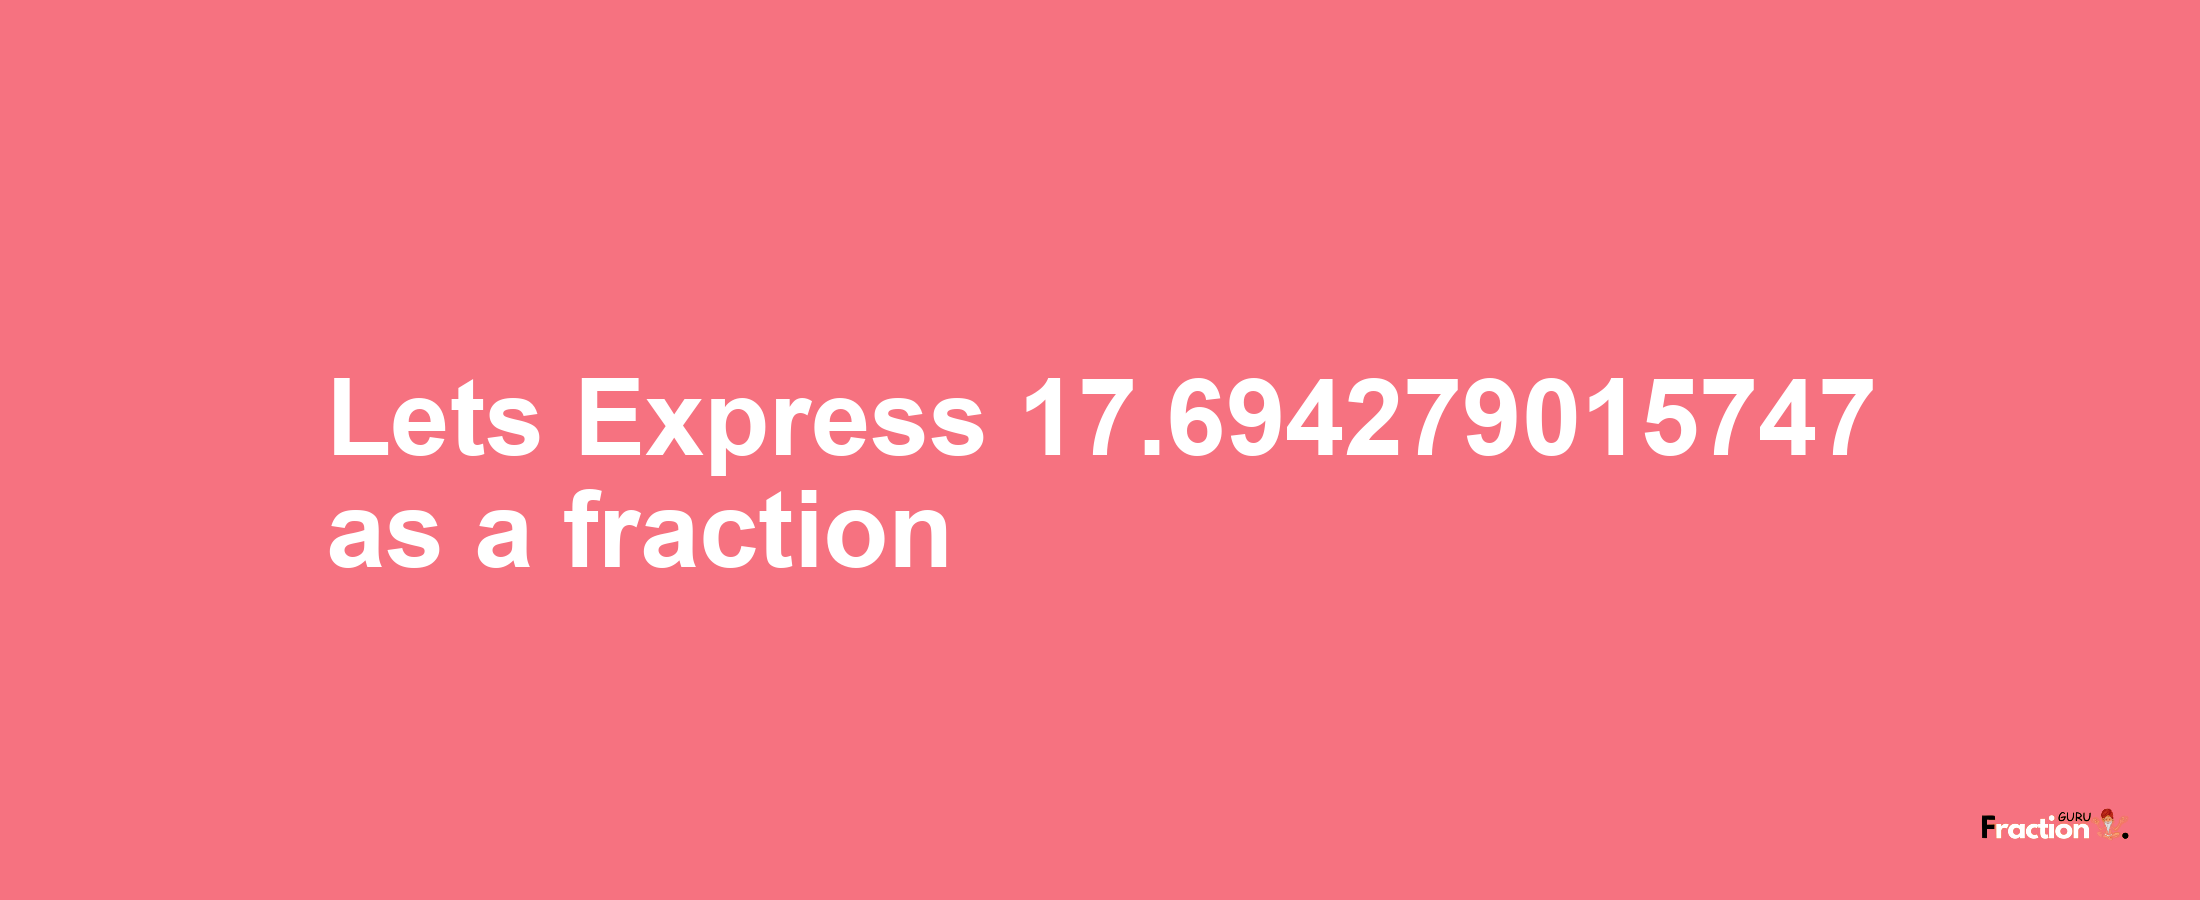 Lets Express 17.694279015747 as afraction